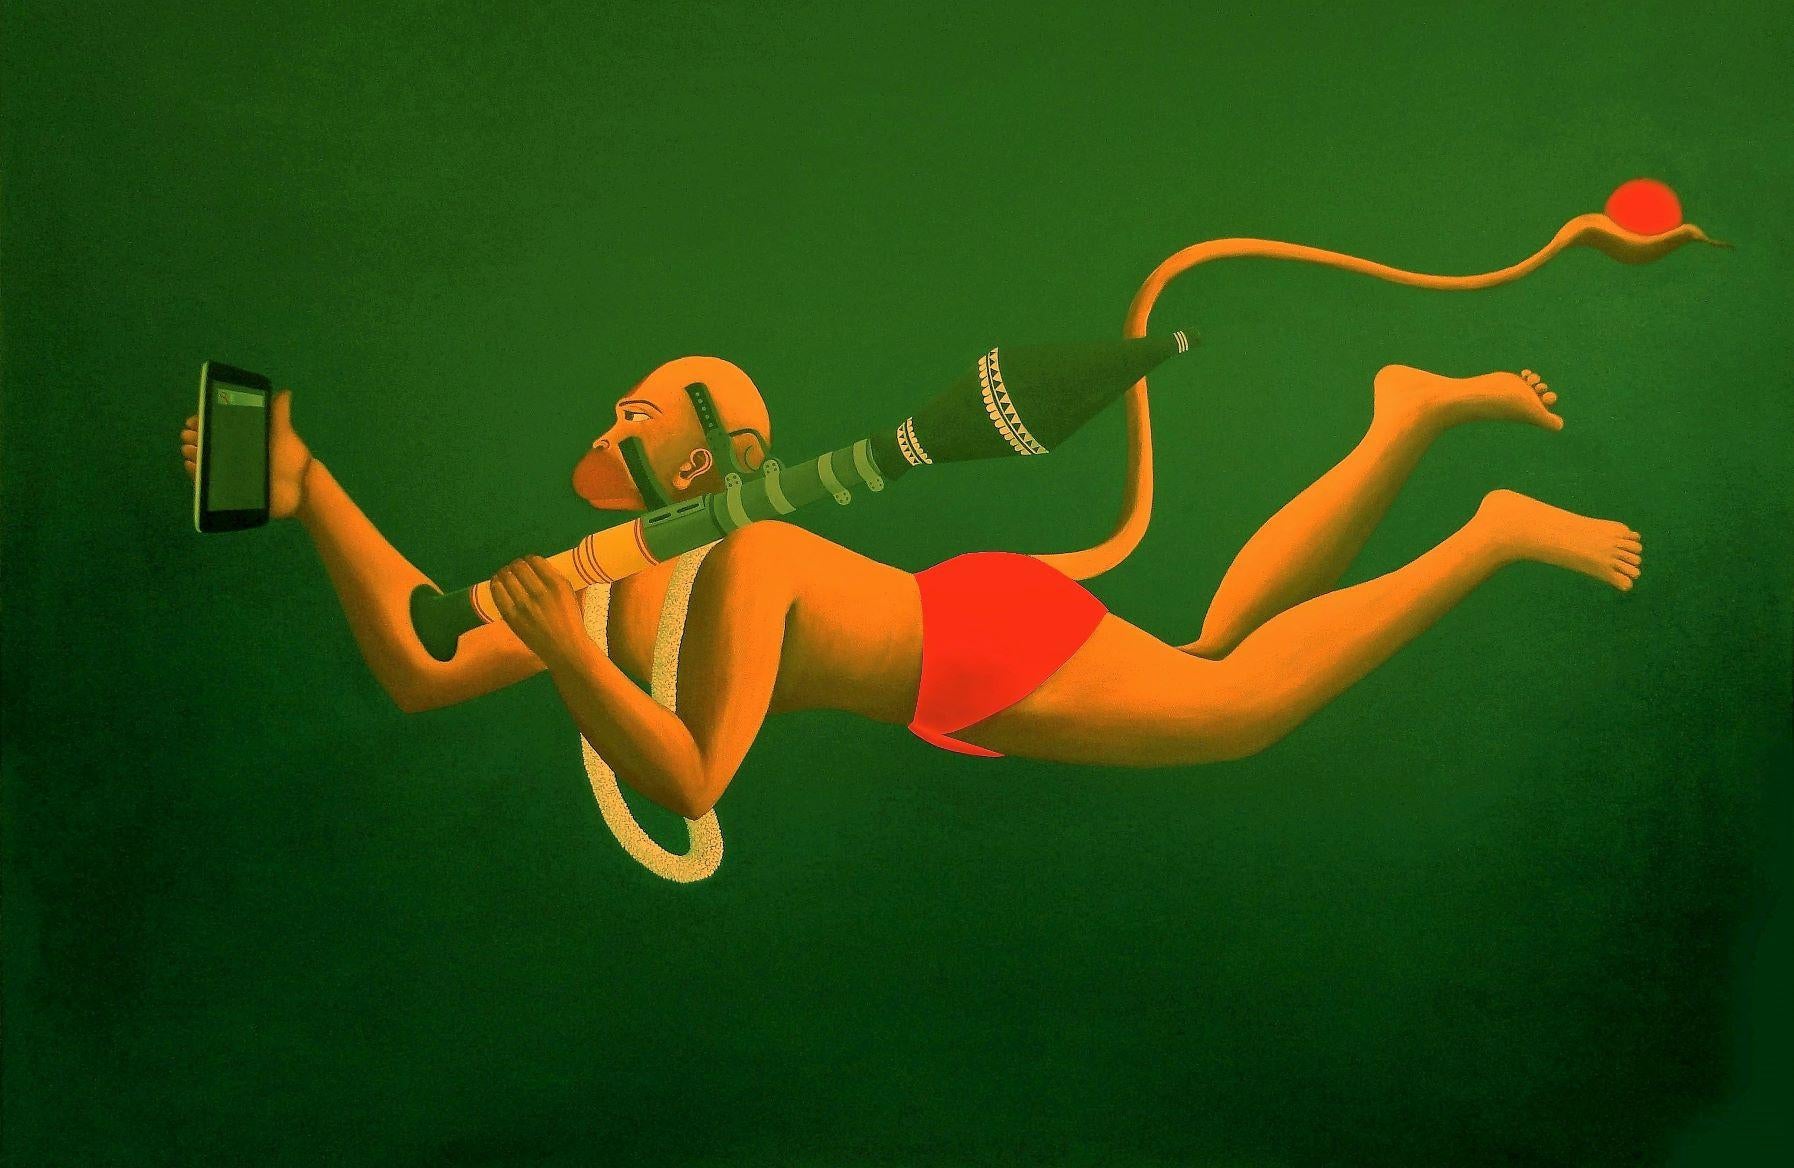 Manish Upadhyay Portrait Painting - Transformation, Hanuman with a Phone, Mythology , Green , yellow color "In Stock"